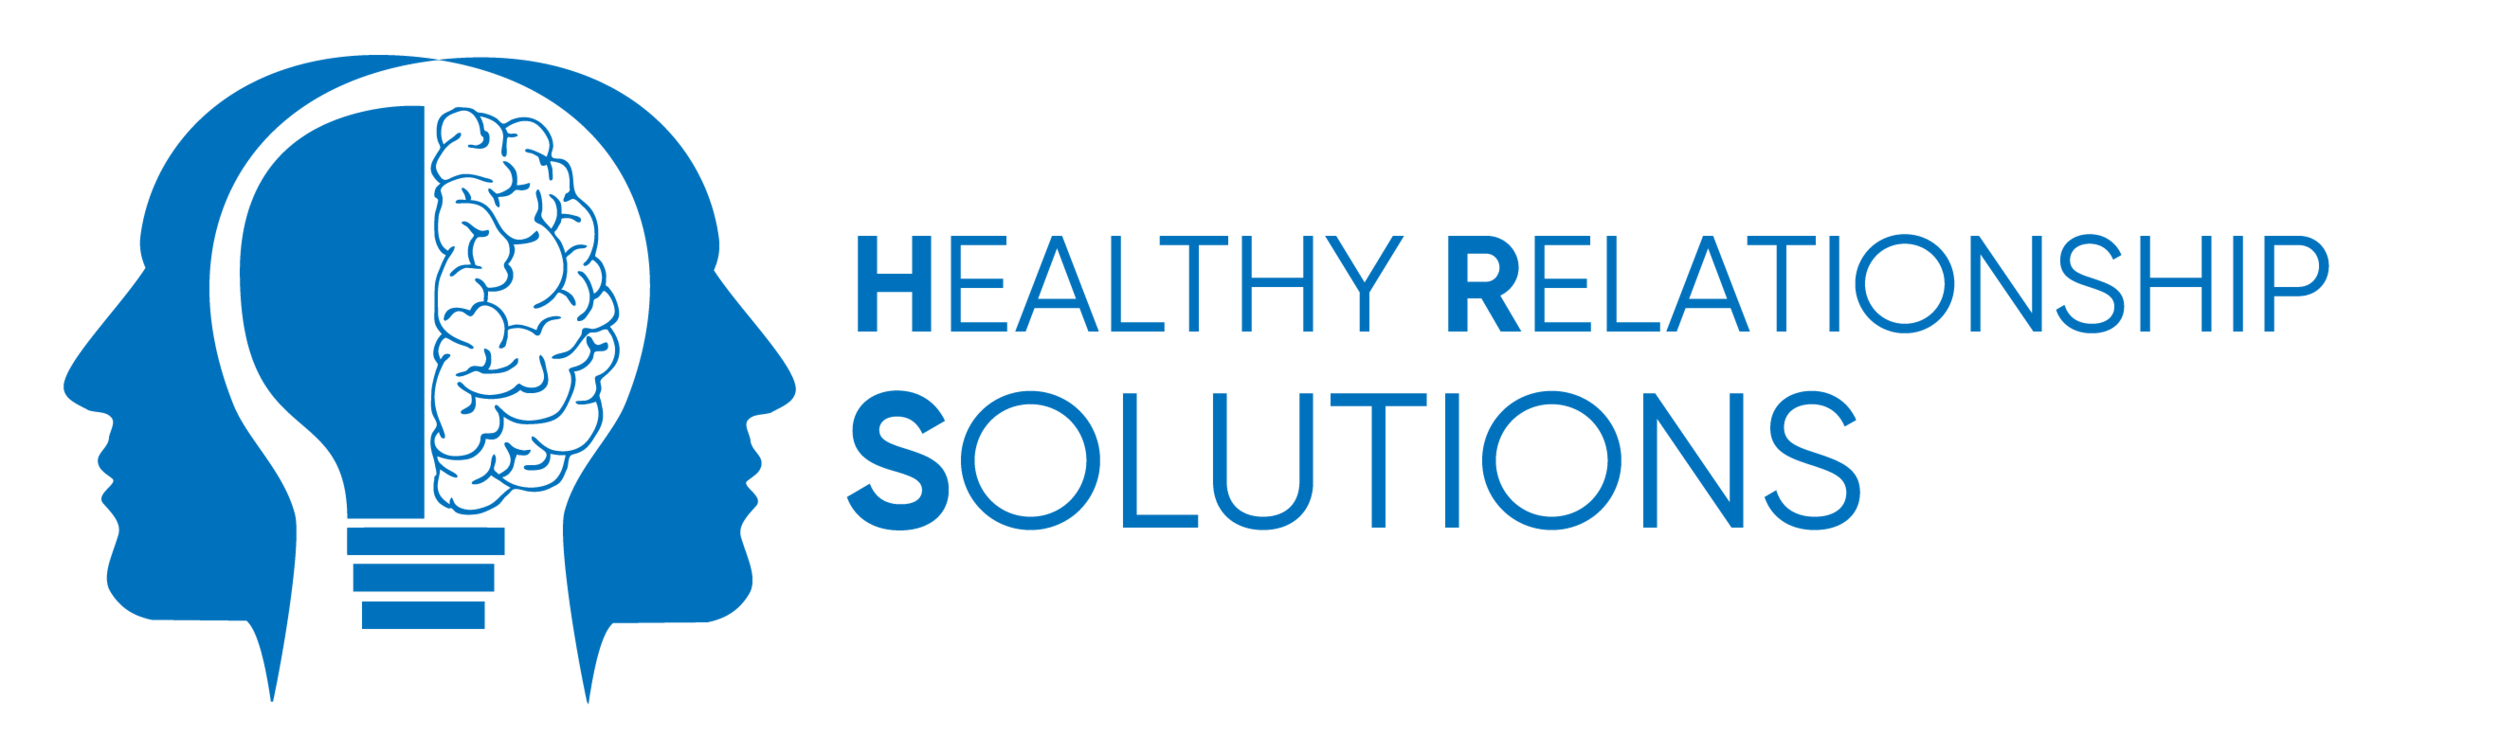 Healthy Relationship Solutions (HRS) - Counselling Wagga Wagga